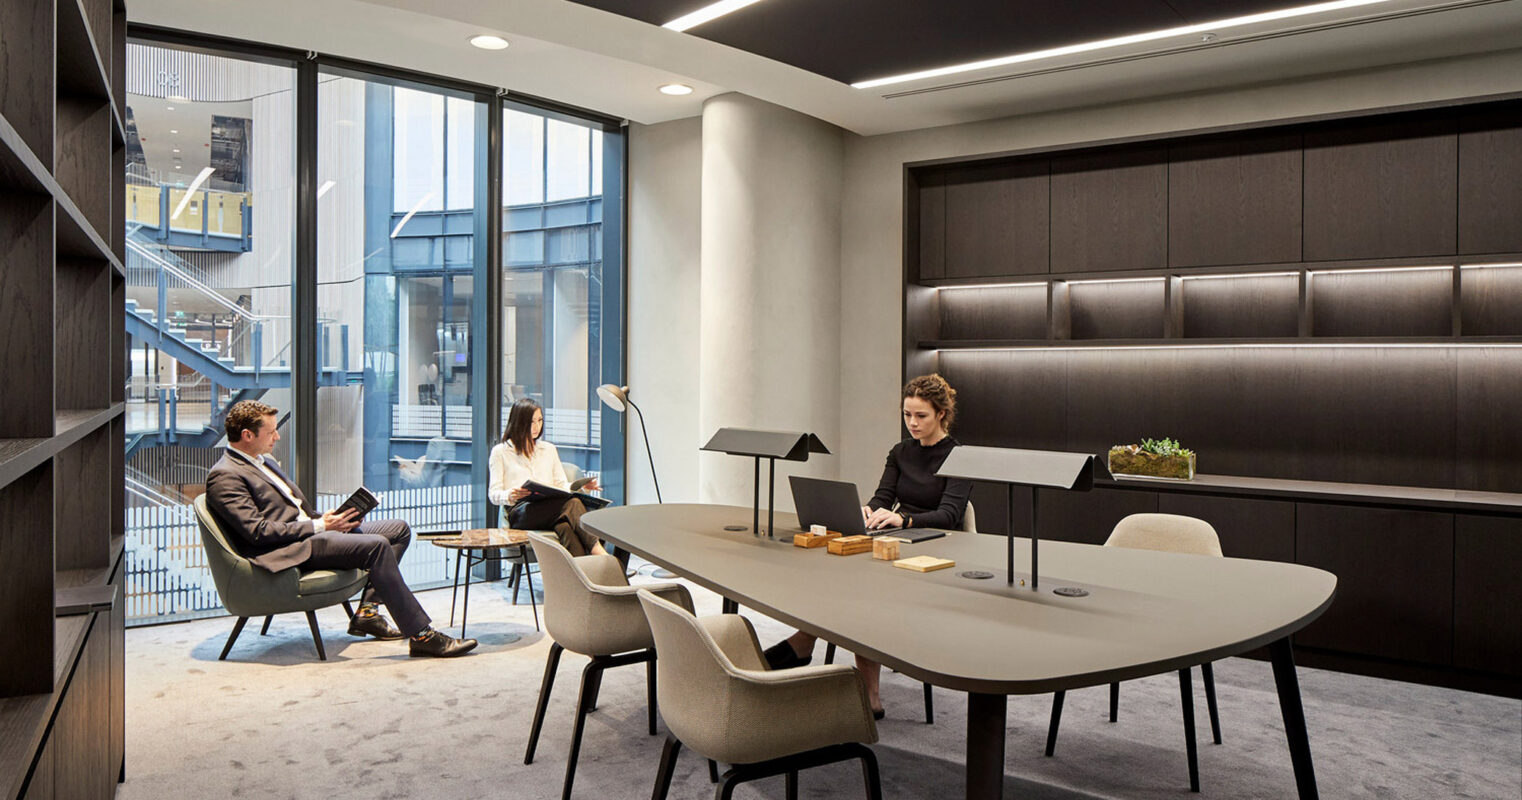 Modern office with ergonomic furniture, accented by a sleek, white kidney-shaped desk, complemented by black upholstered chairs. Ambient lighting highlights the gray textured carpet and panelled walls, creating a dynamic workspace that balances professionalism and contemporary design.